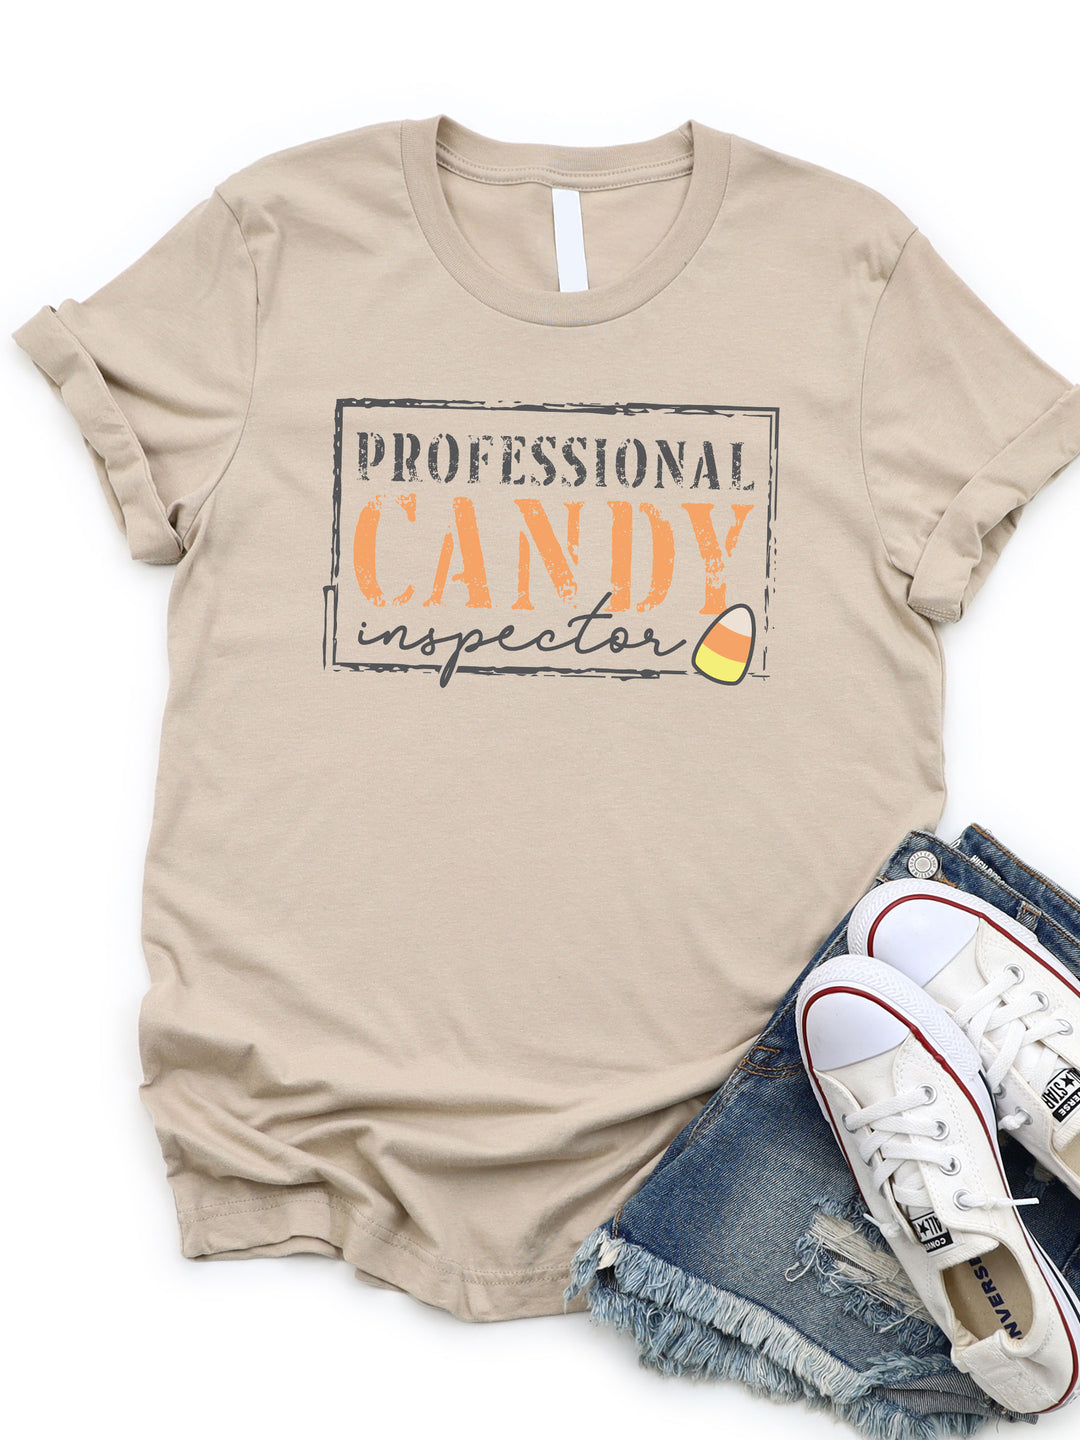 Professional Candy Inspector Graphic Tee